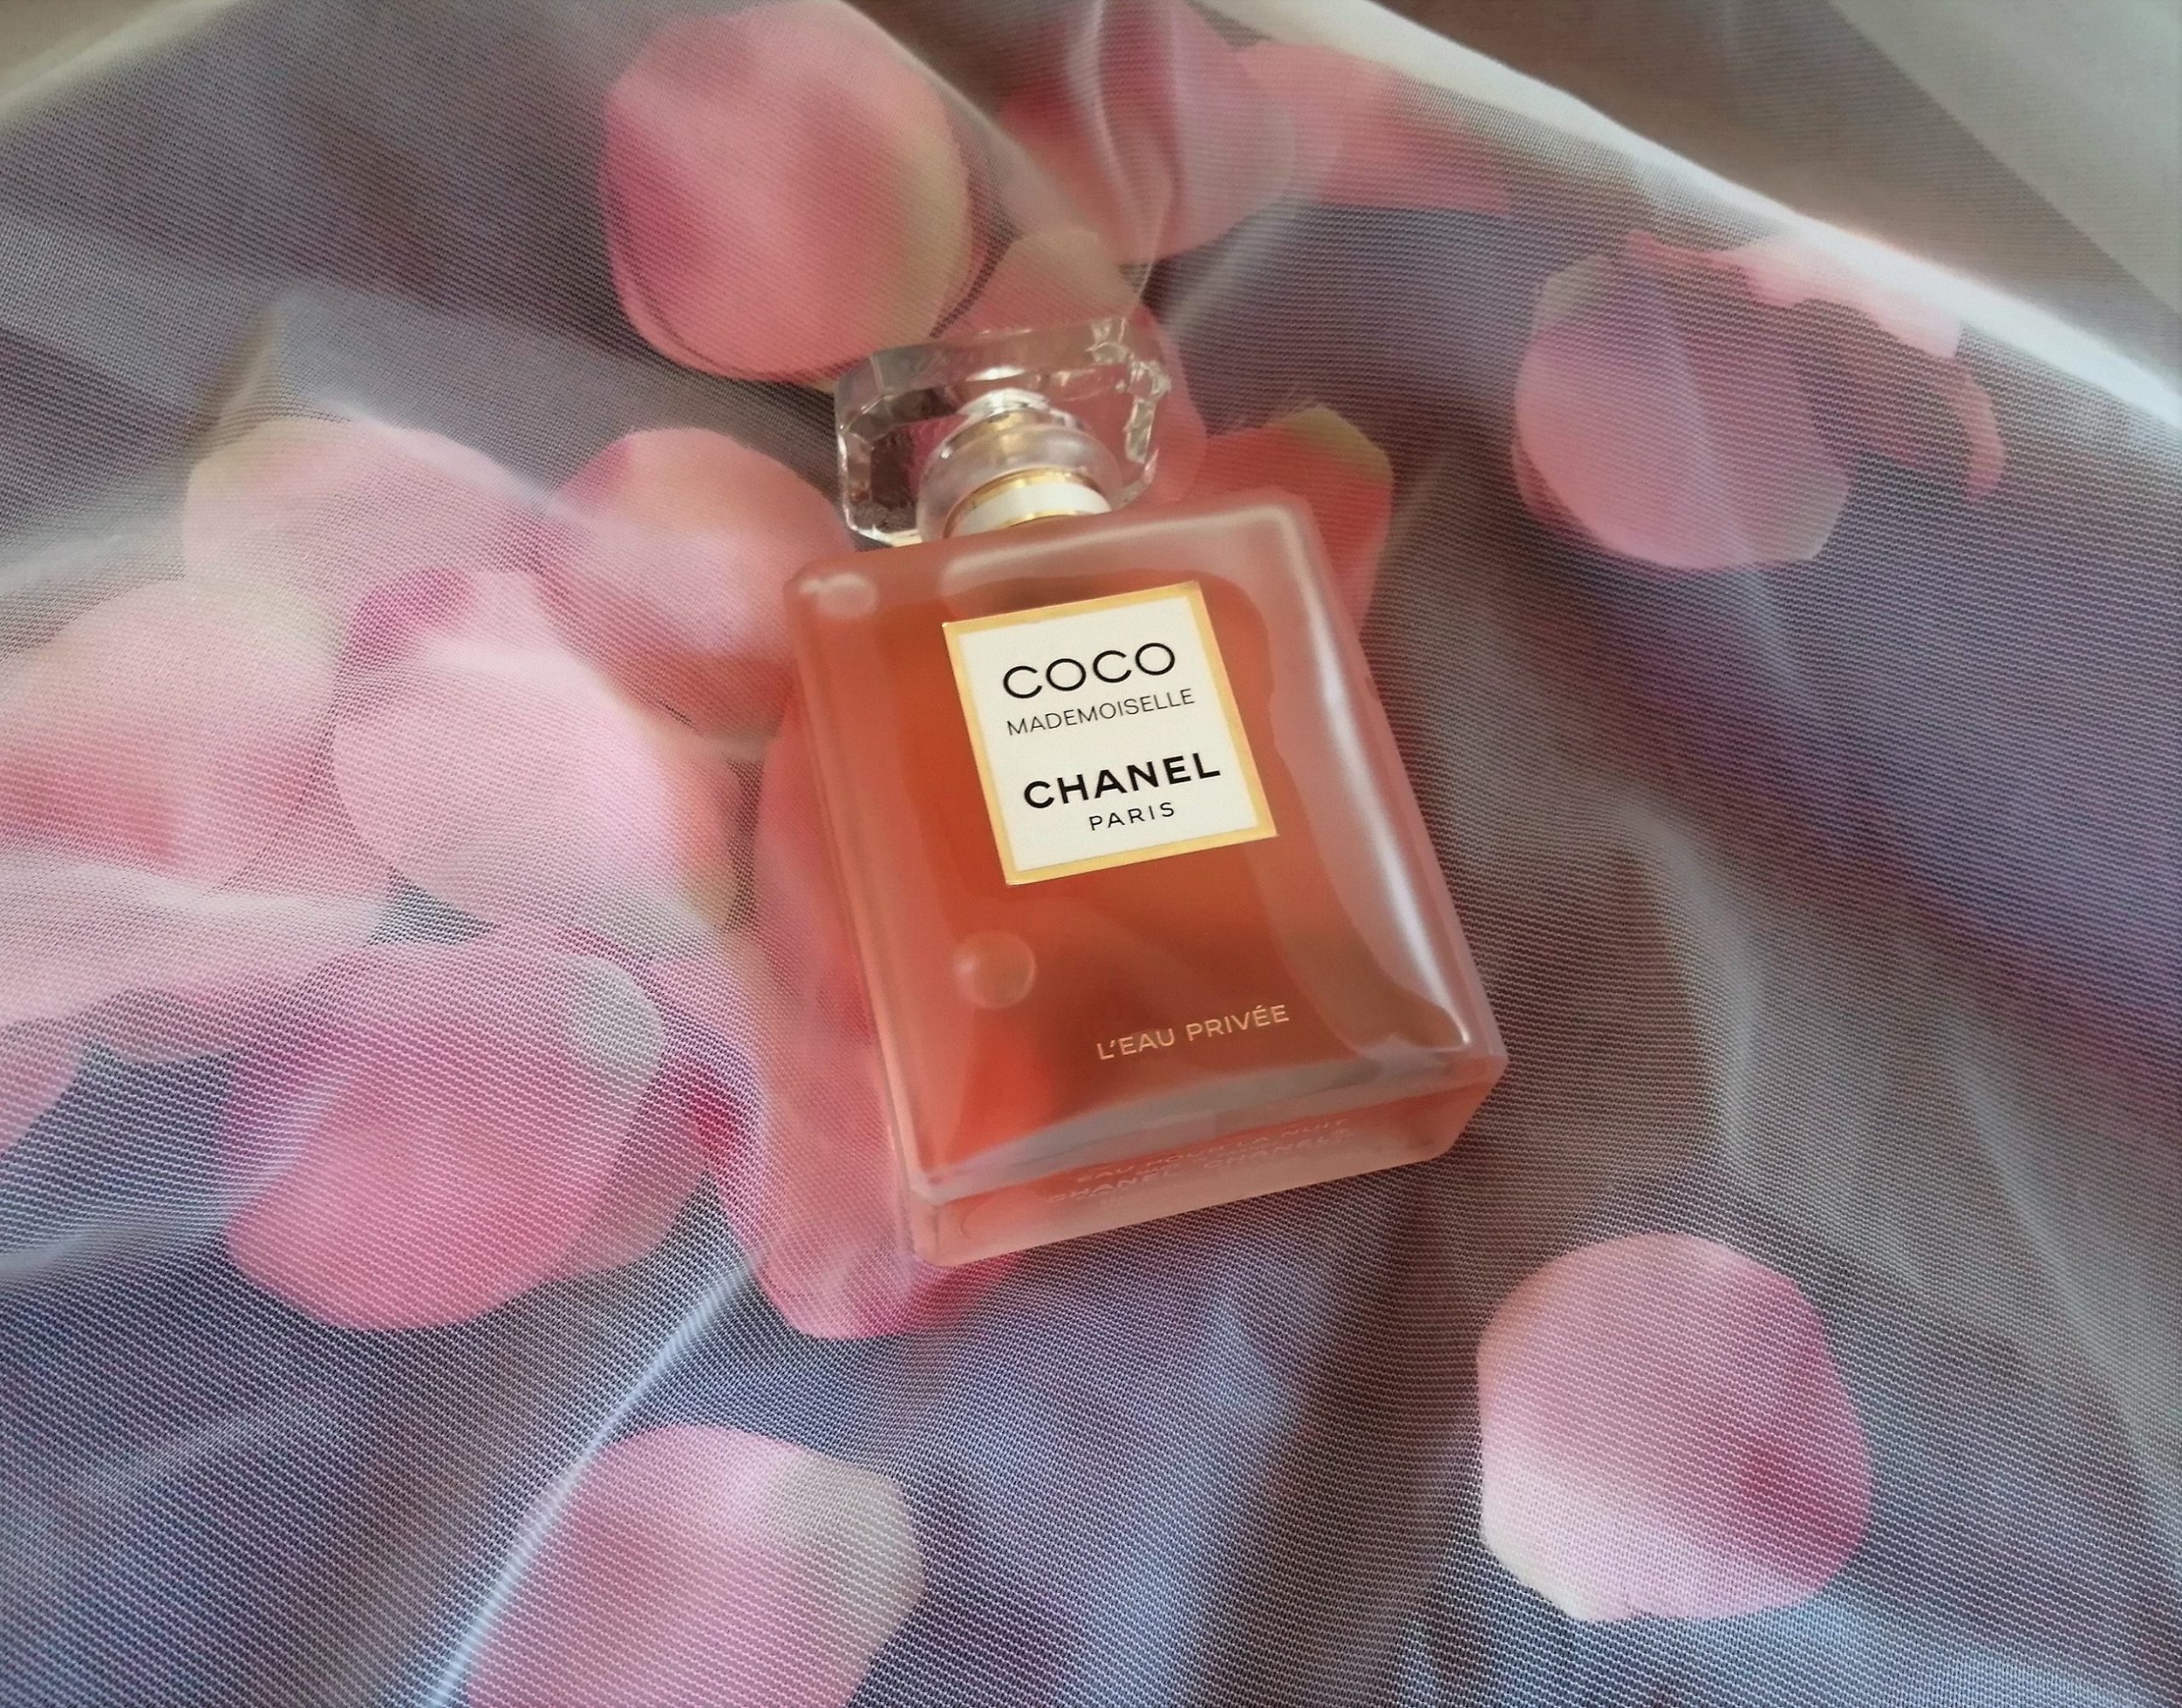 BEFORE YOU BUY Chanel Coco Mademoiselle